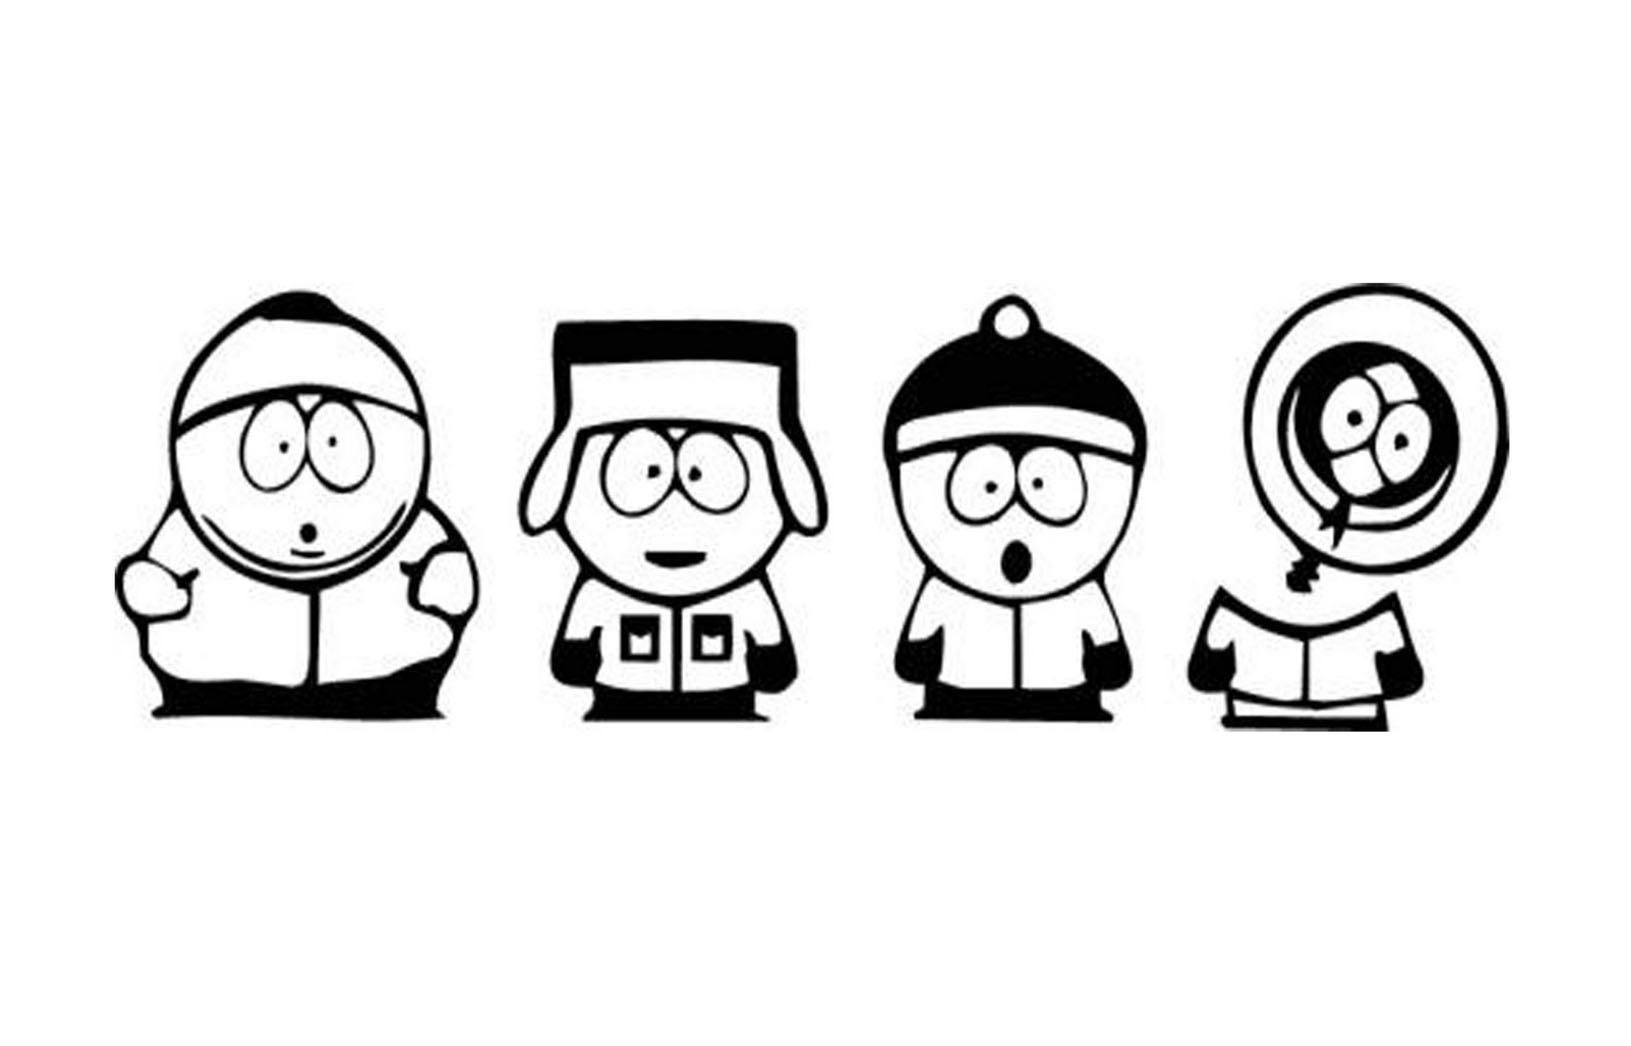 South Park Coloring Page South Park Free To Color For Children South Park Kids Coloring Pages